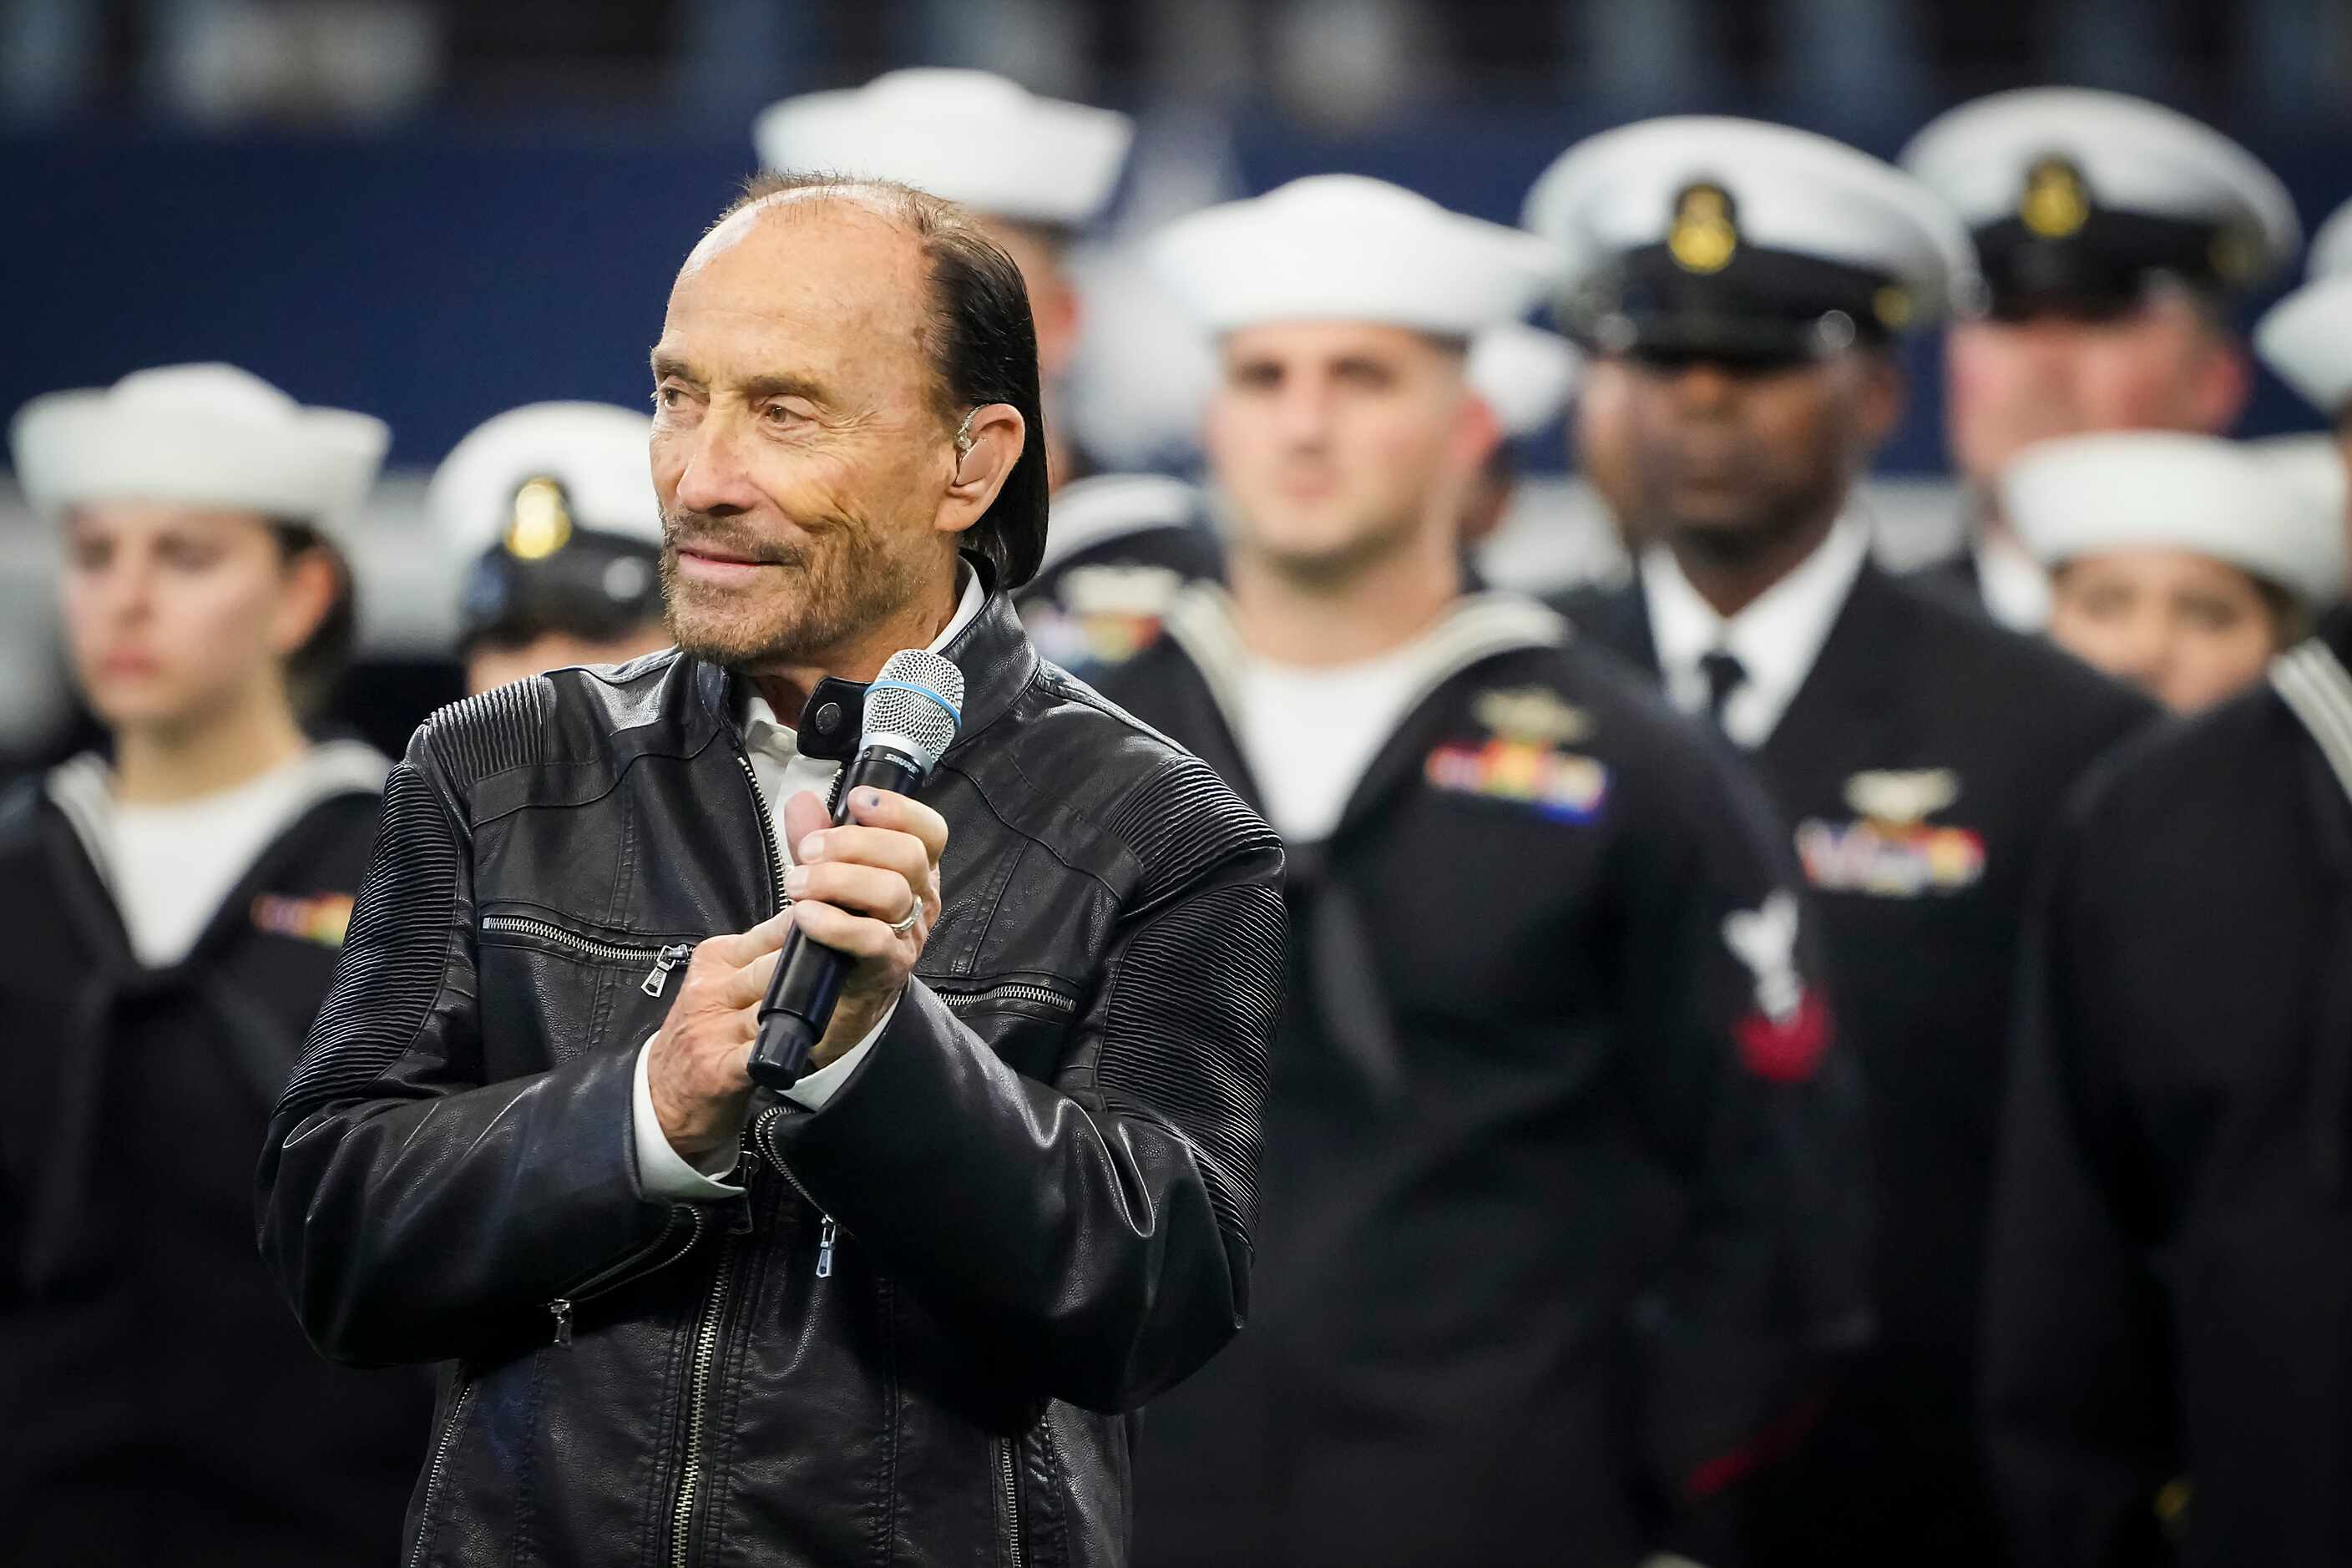 Lee Greenwood sings "God Bless the U.S.A." during halftime of an NFL football game between...